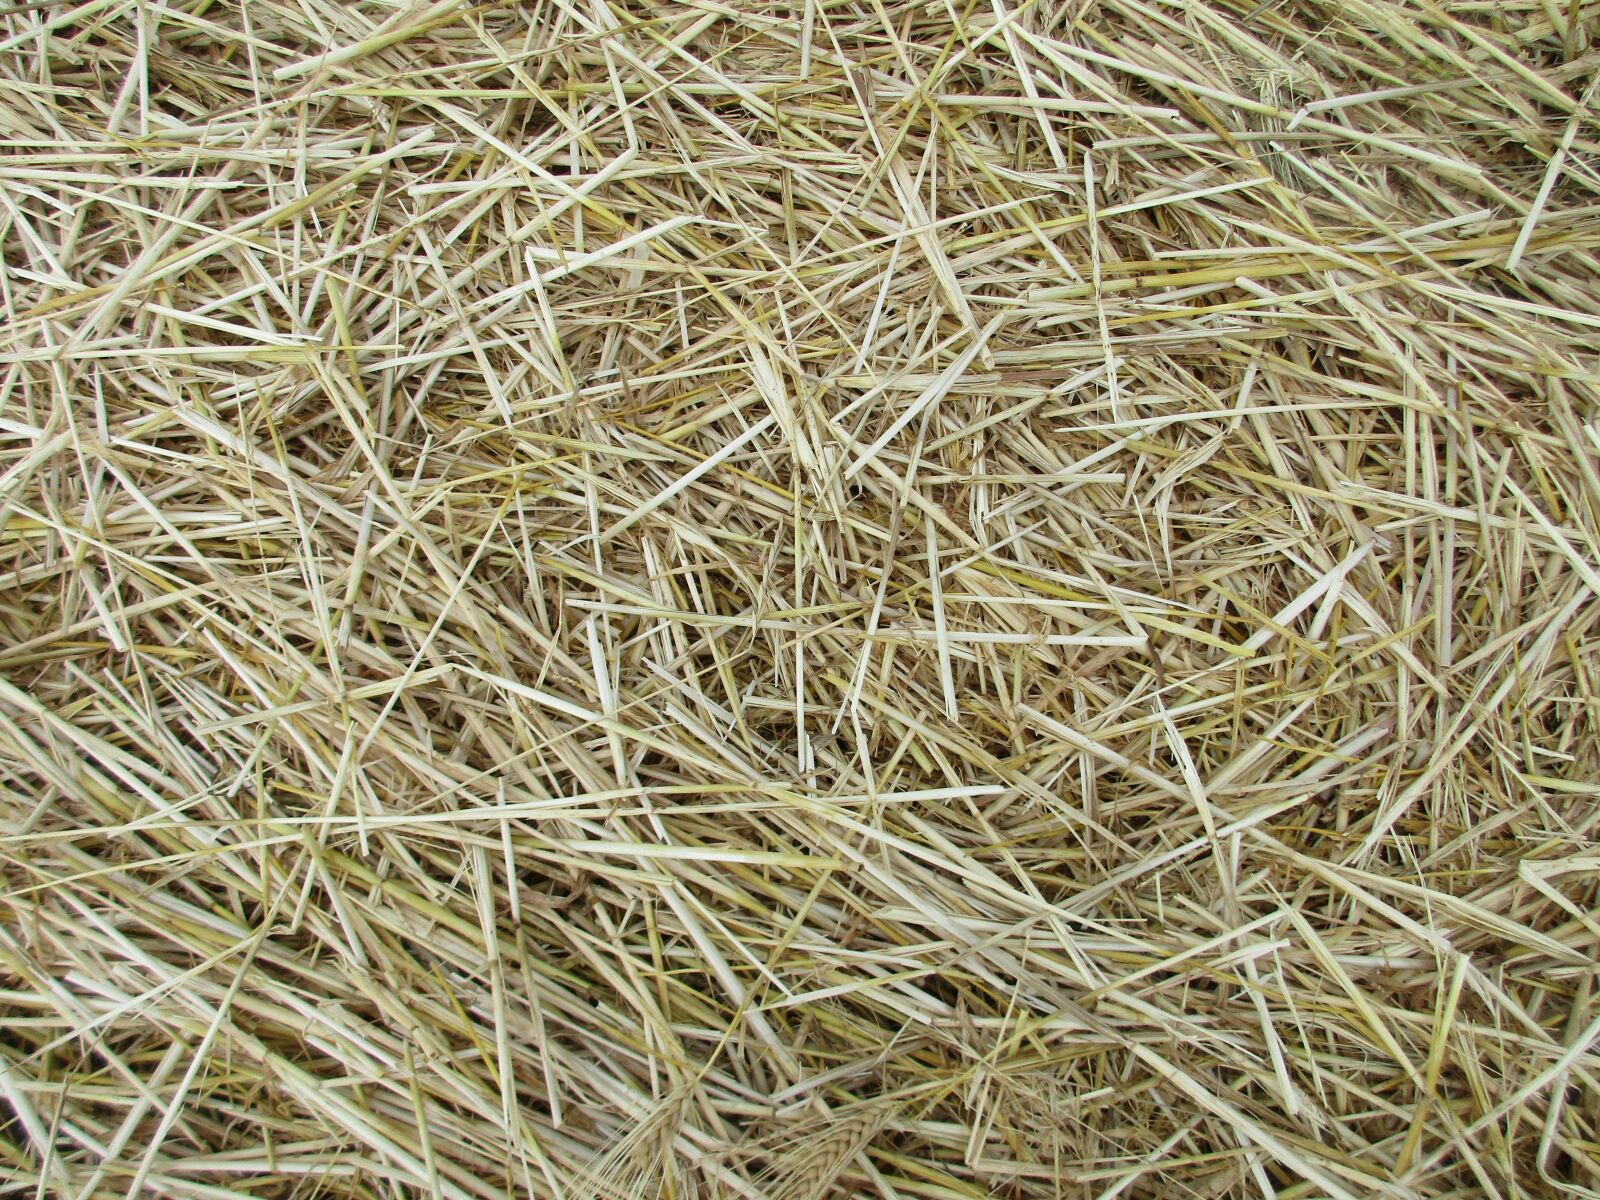 Canon PowerShot ELPH 170 IS (IXUS 170 / IXY 170) sample photo. Straw, texture, agriculture photography